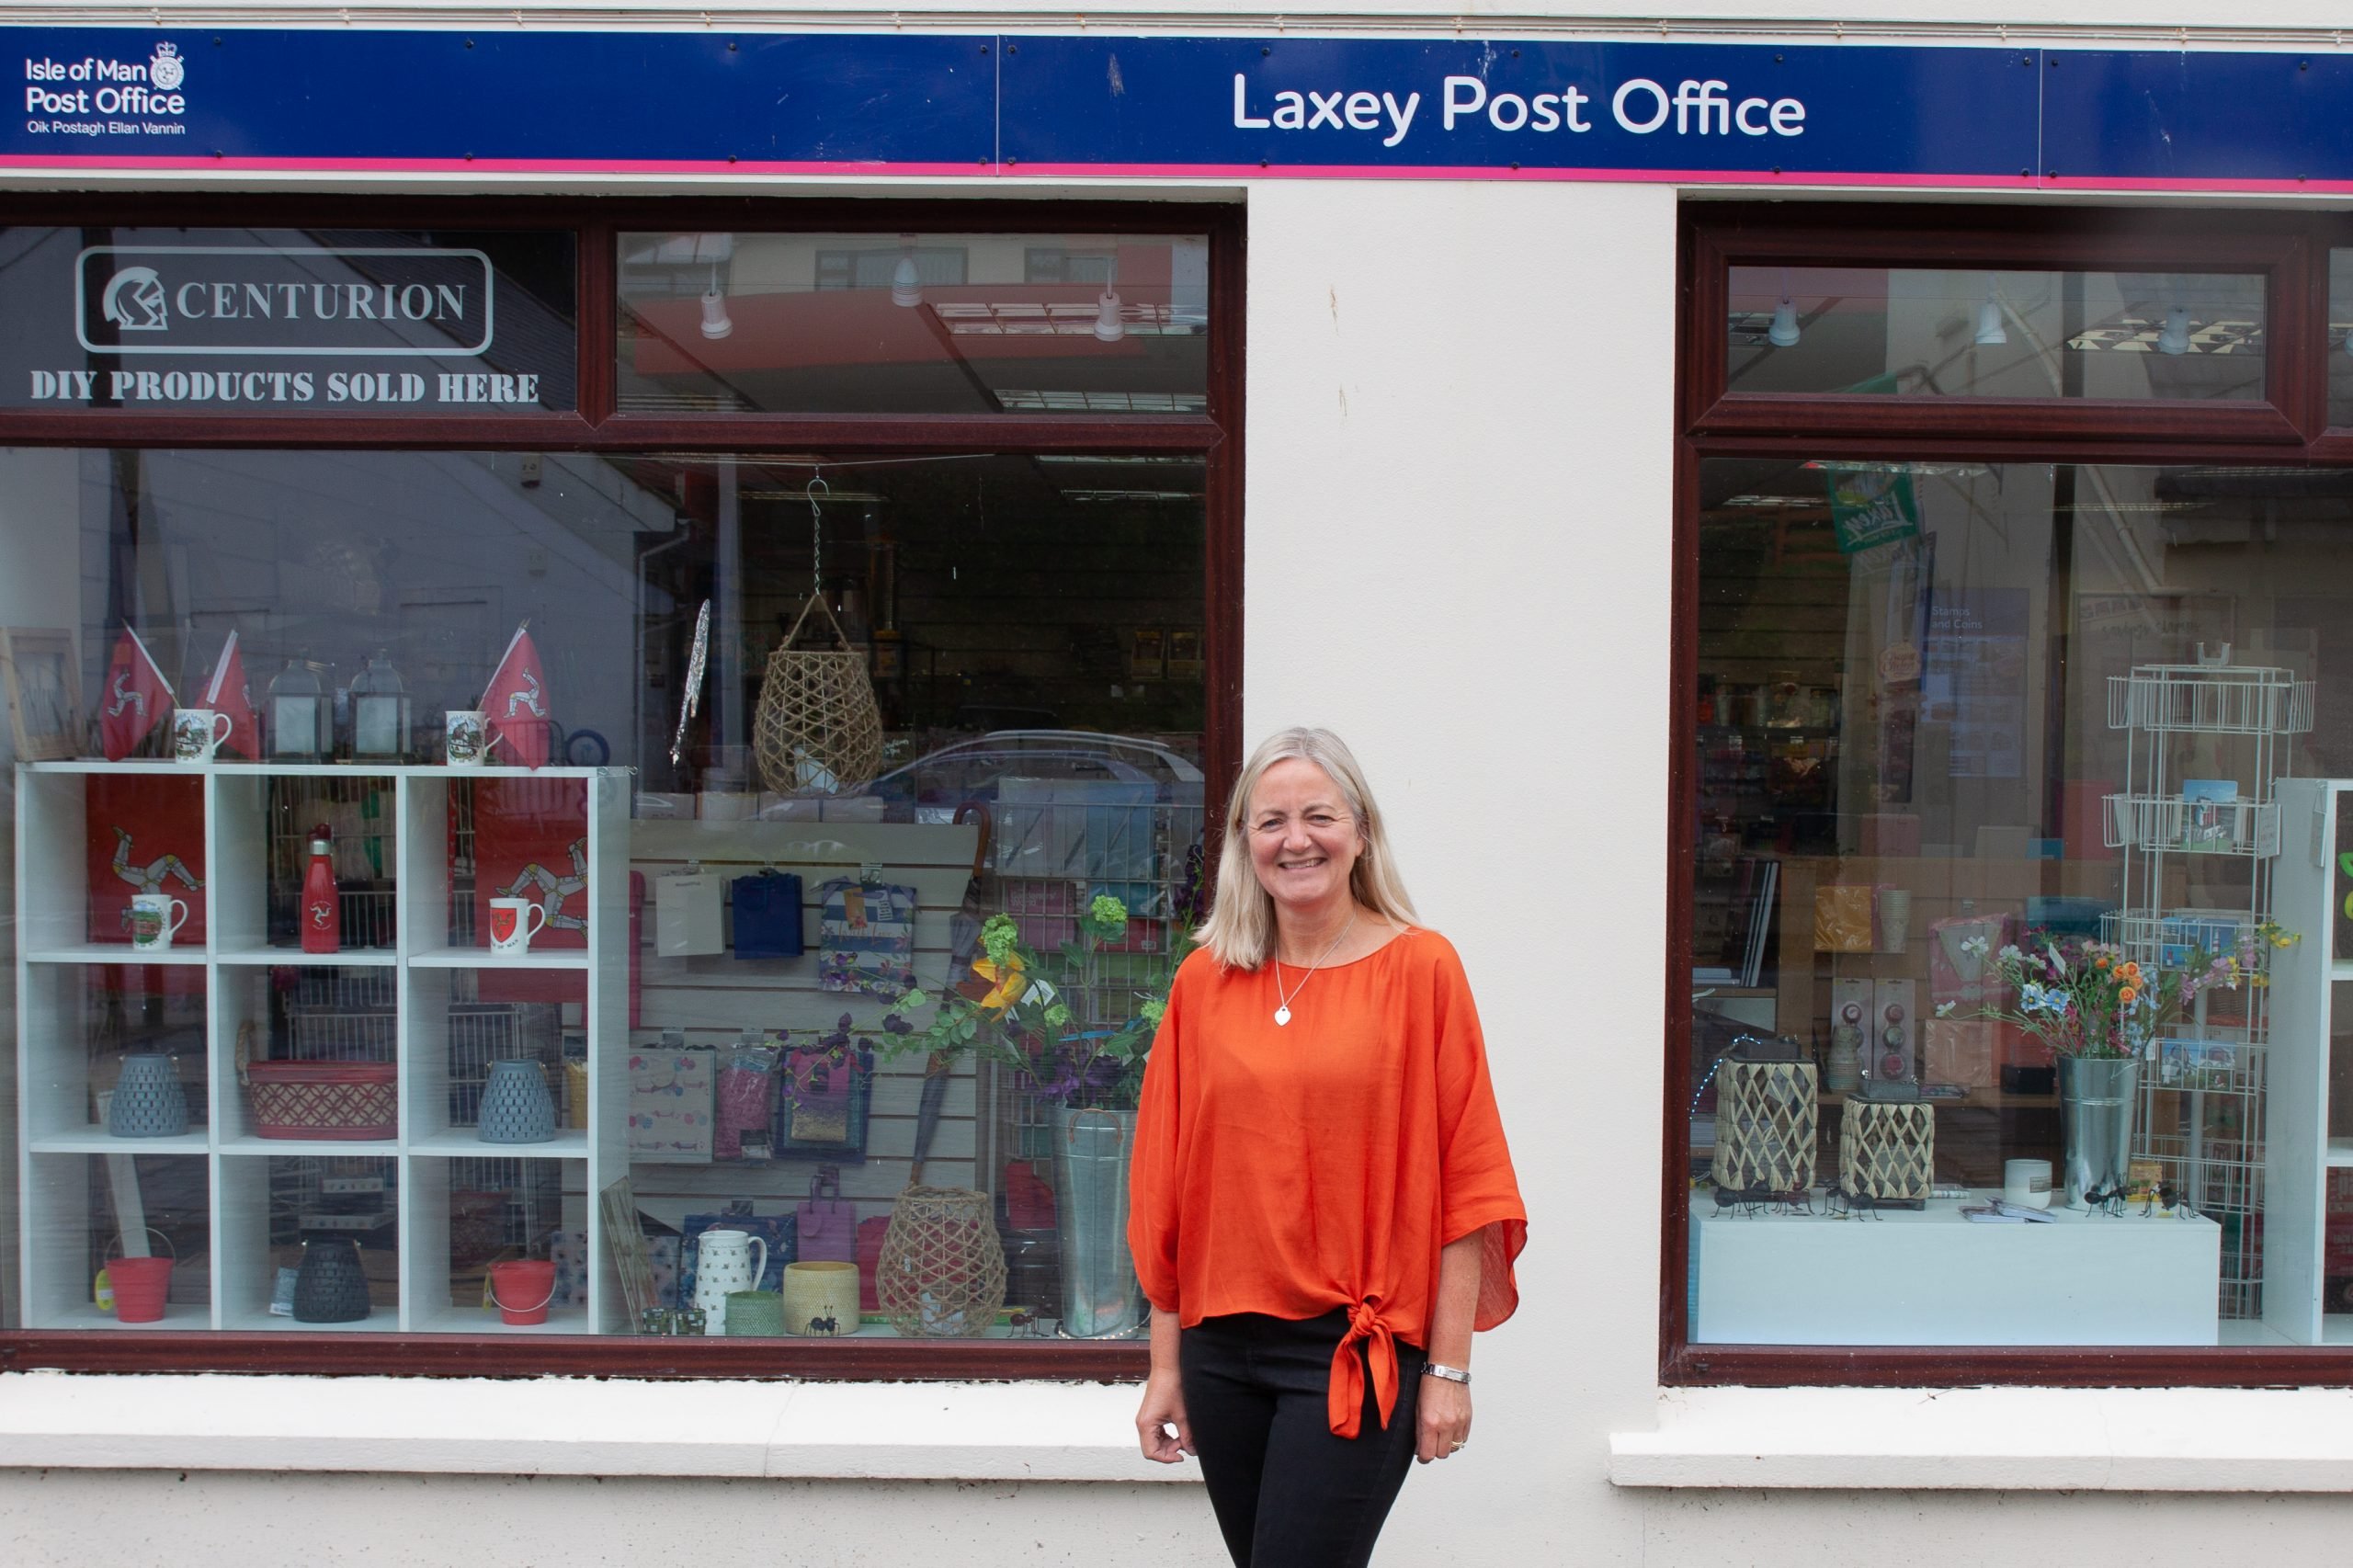 Laxey Post Office